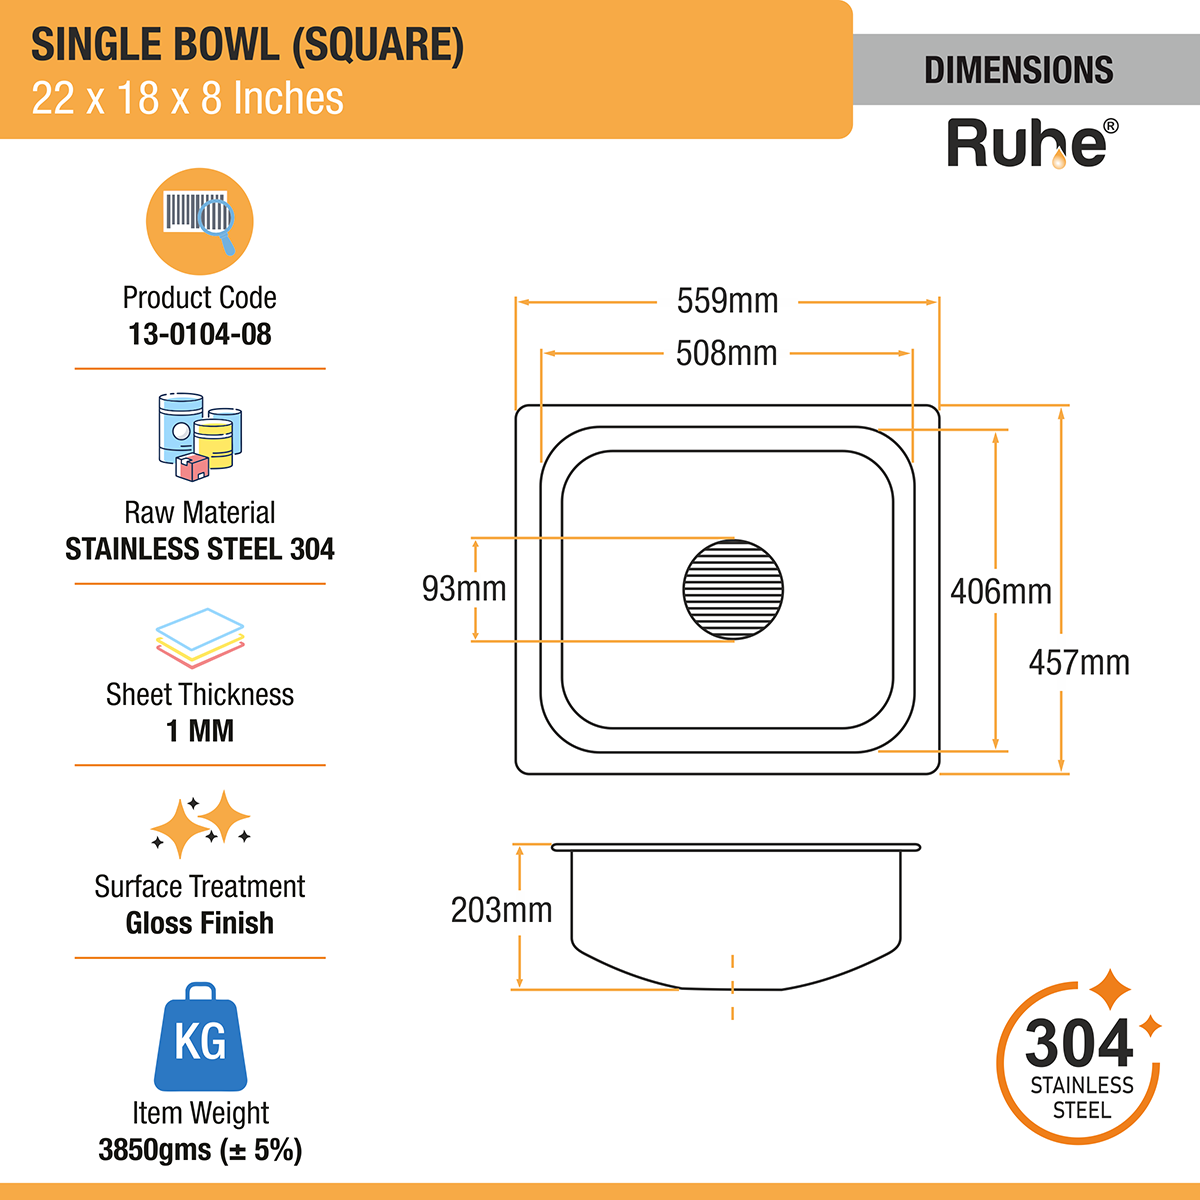 Square Single Bowl (22 x 18 x 8 inches) 304-Grade Kitchen Sink dimensions and sizes